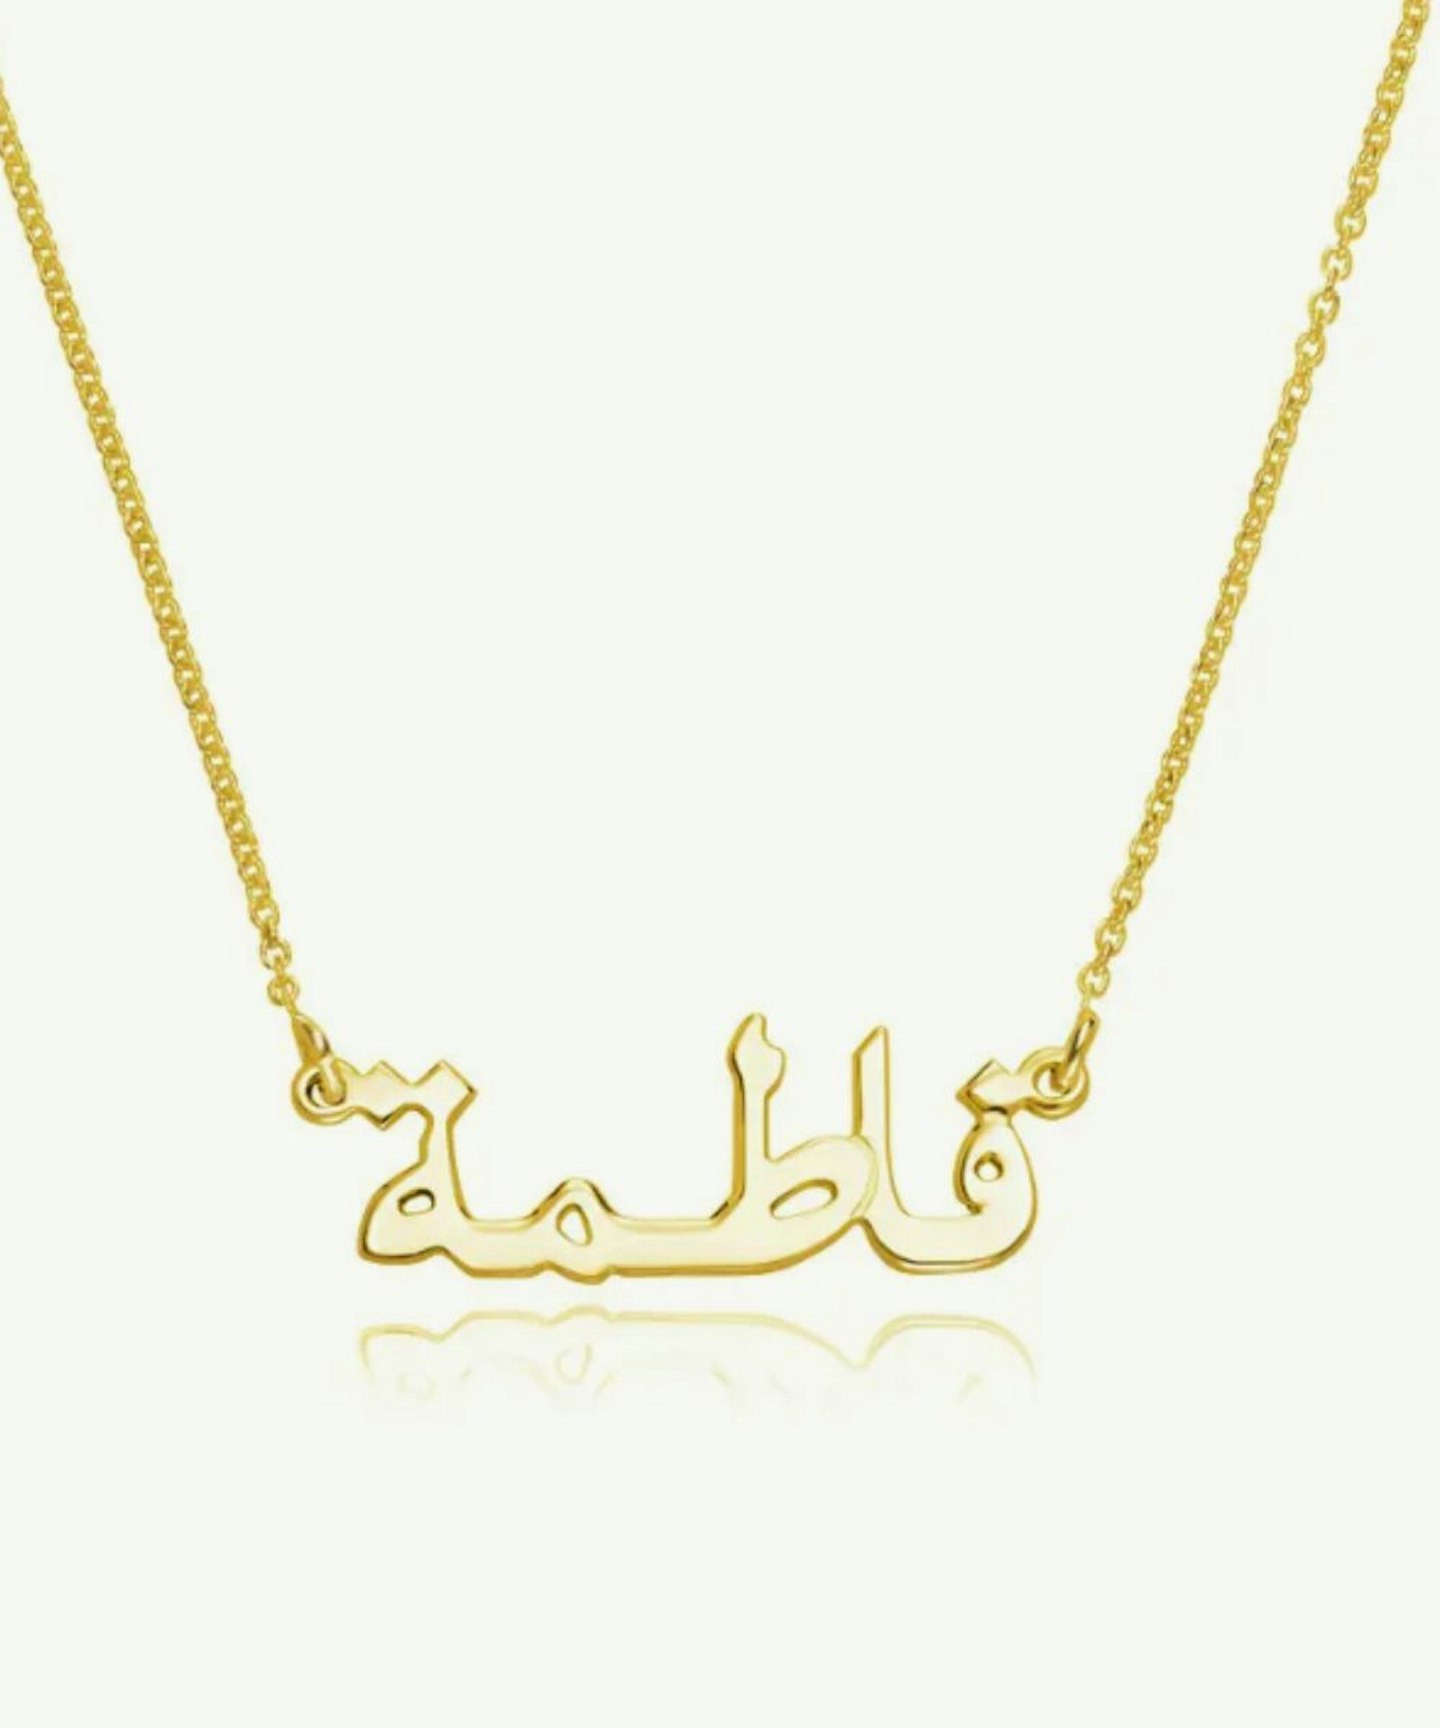 Myka Personalised Arabic Name Necklace in 18ct Gold Plating